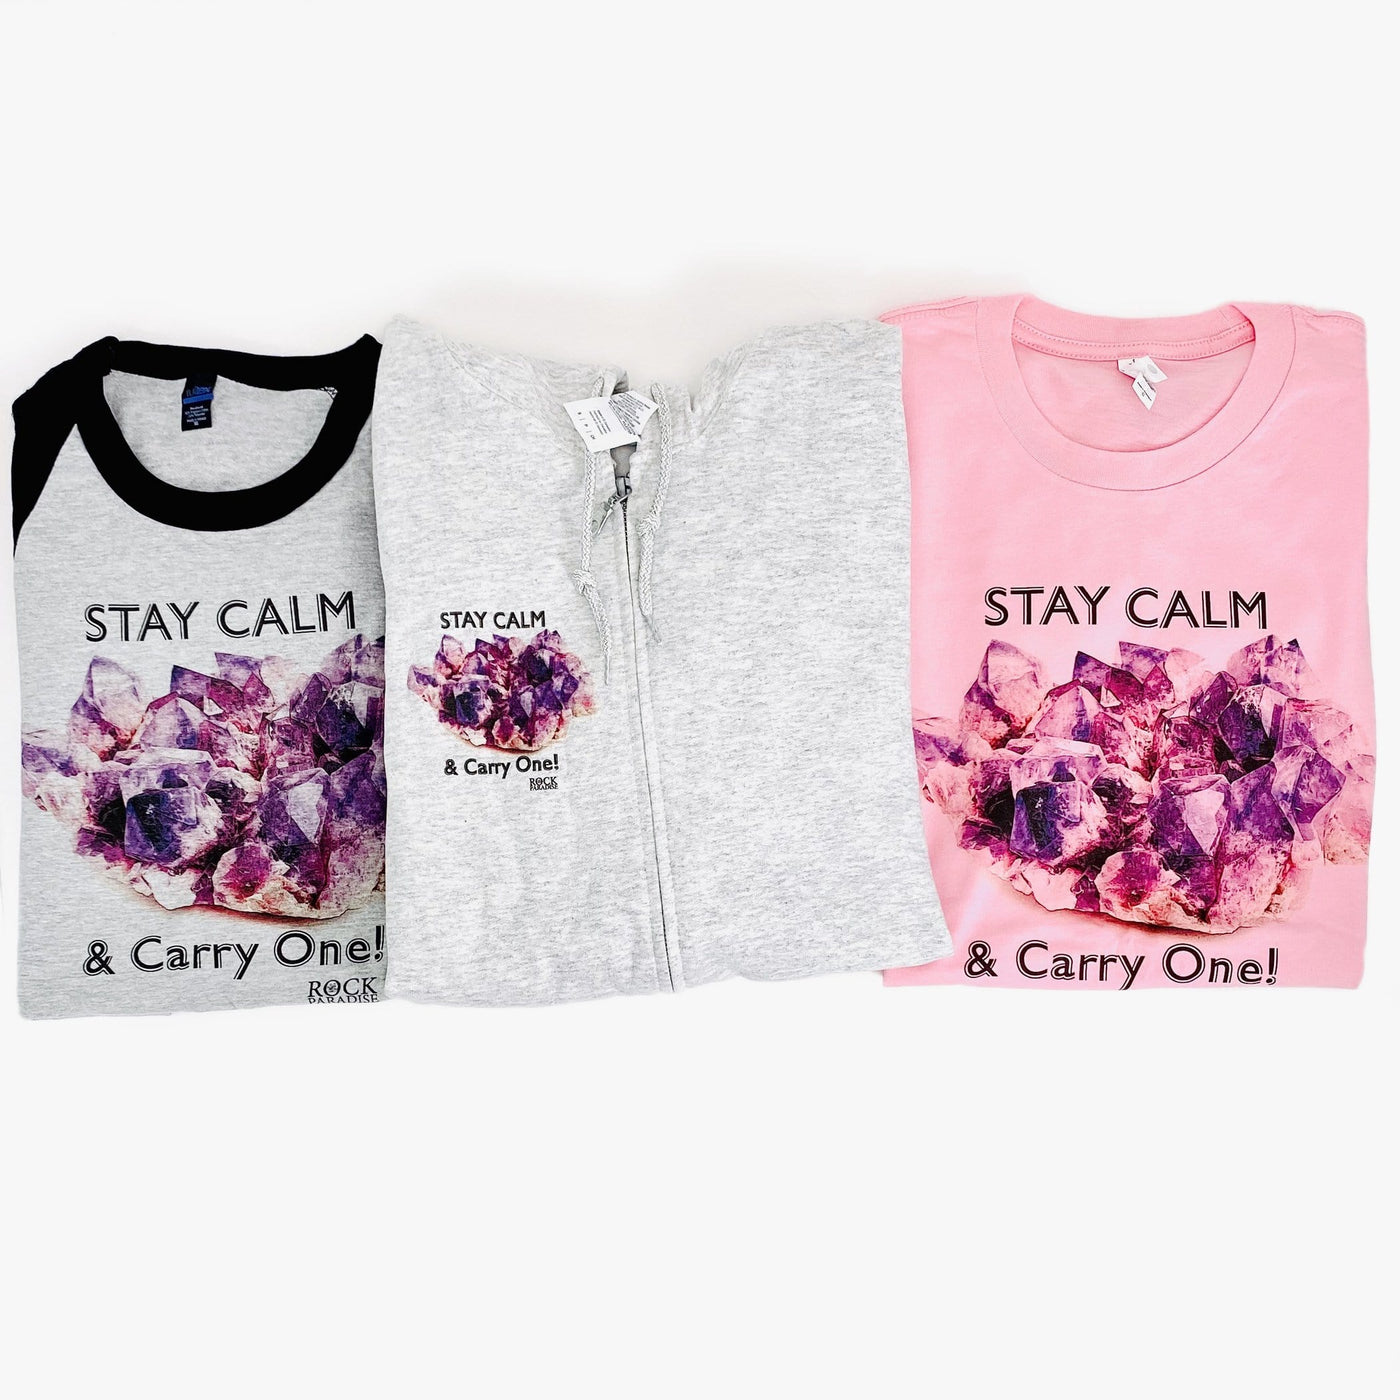 stay calm and carry one baseball shirt, hoodie, and t shirt on white background